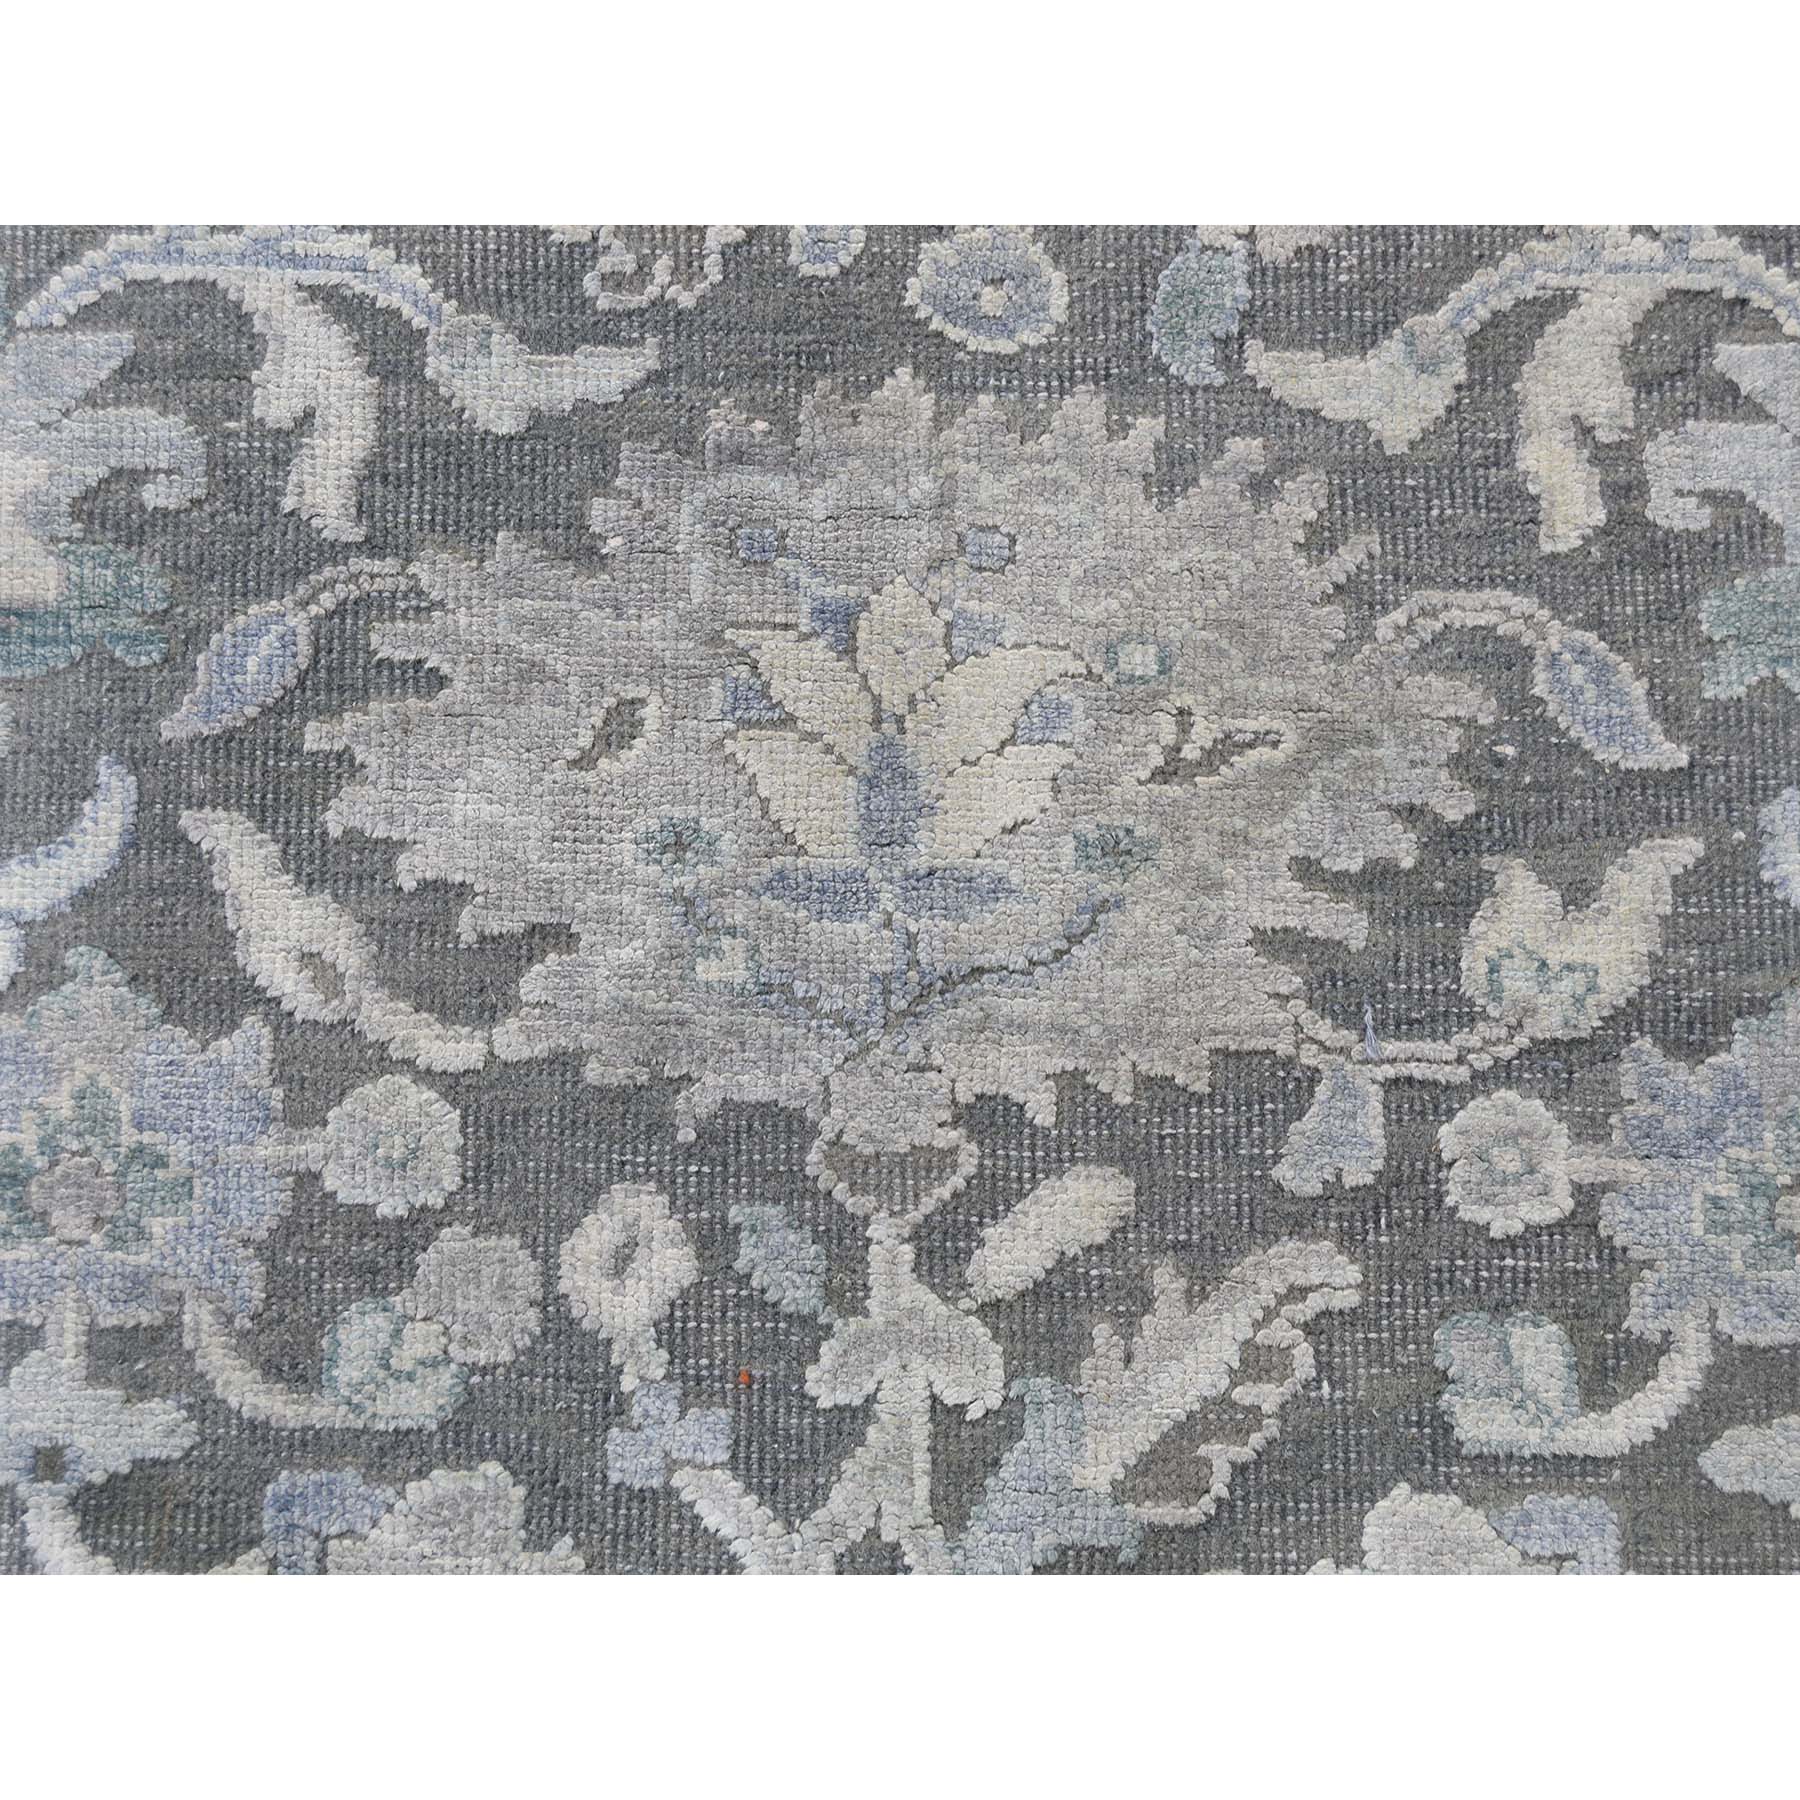 8-1 x10- Hand-Knotted Oushak Influence Silk Textured Wool Oriental Rug 